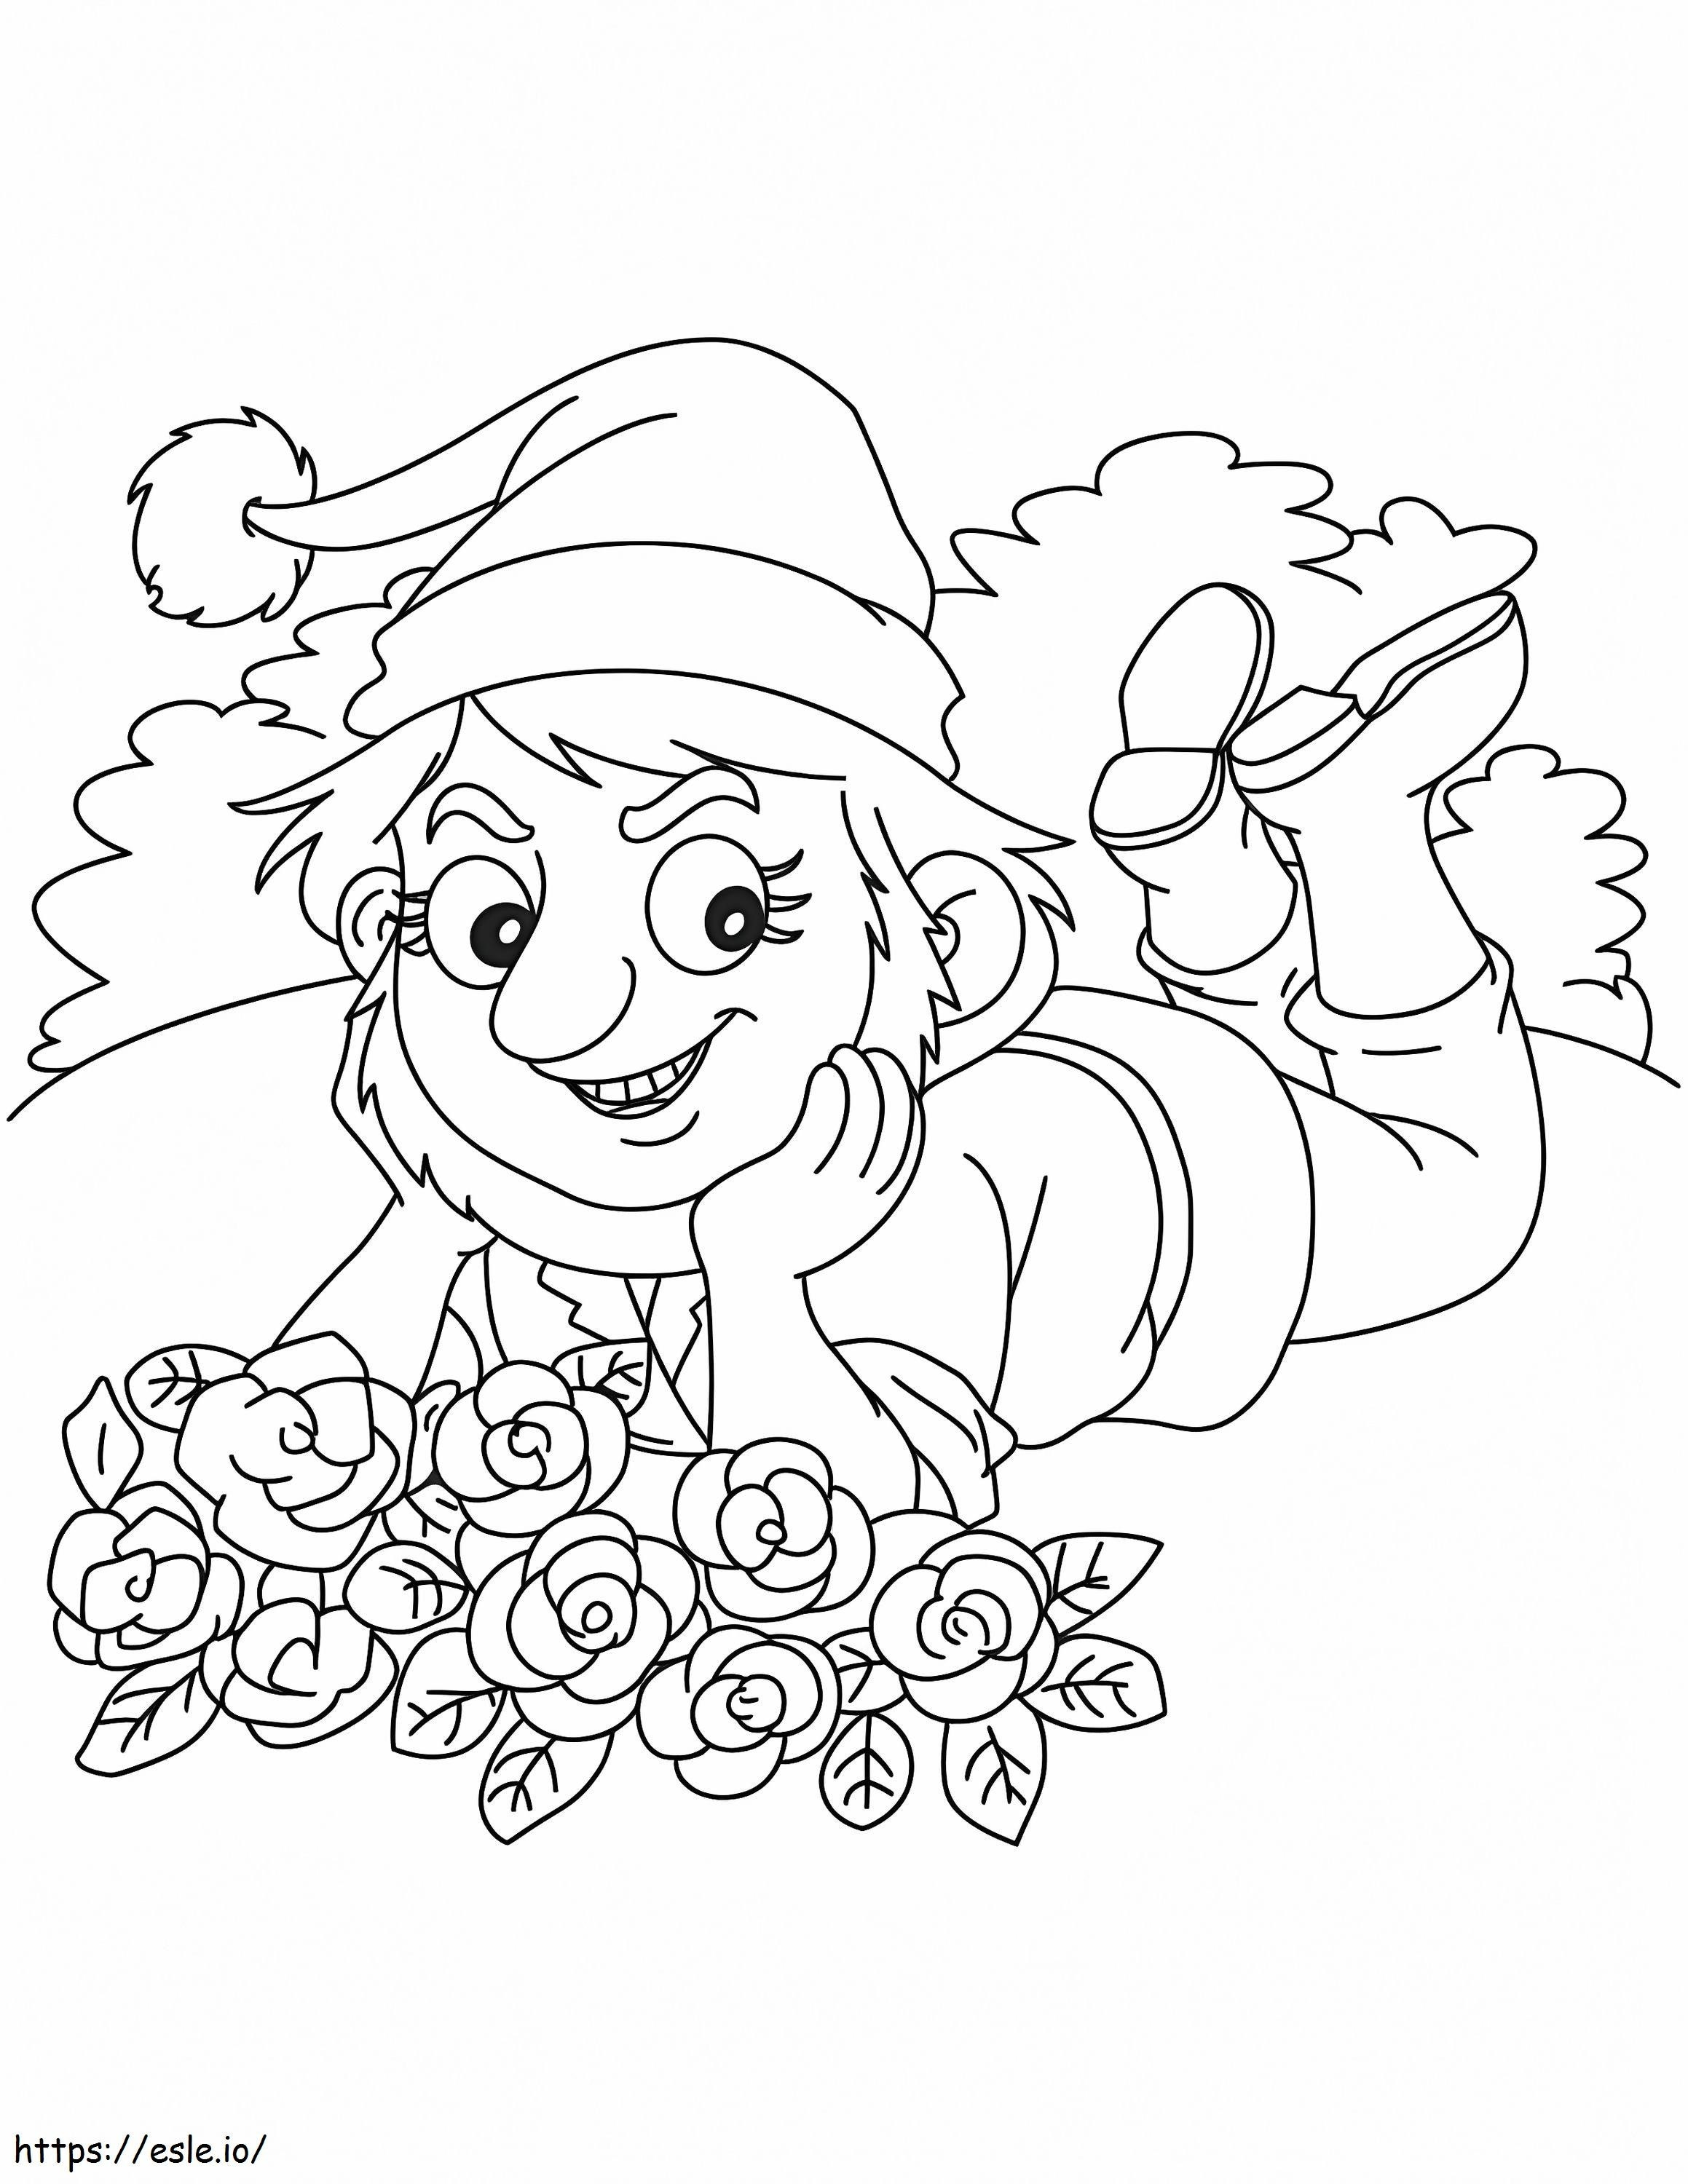 Gnome Picked Gardenia Flowers coloring page